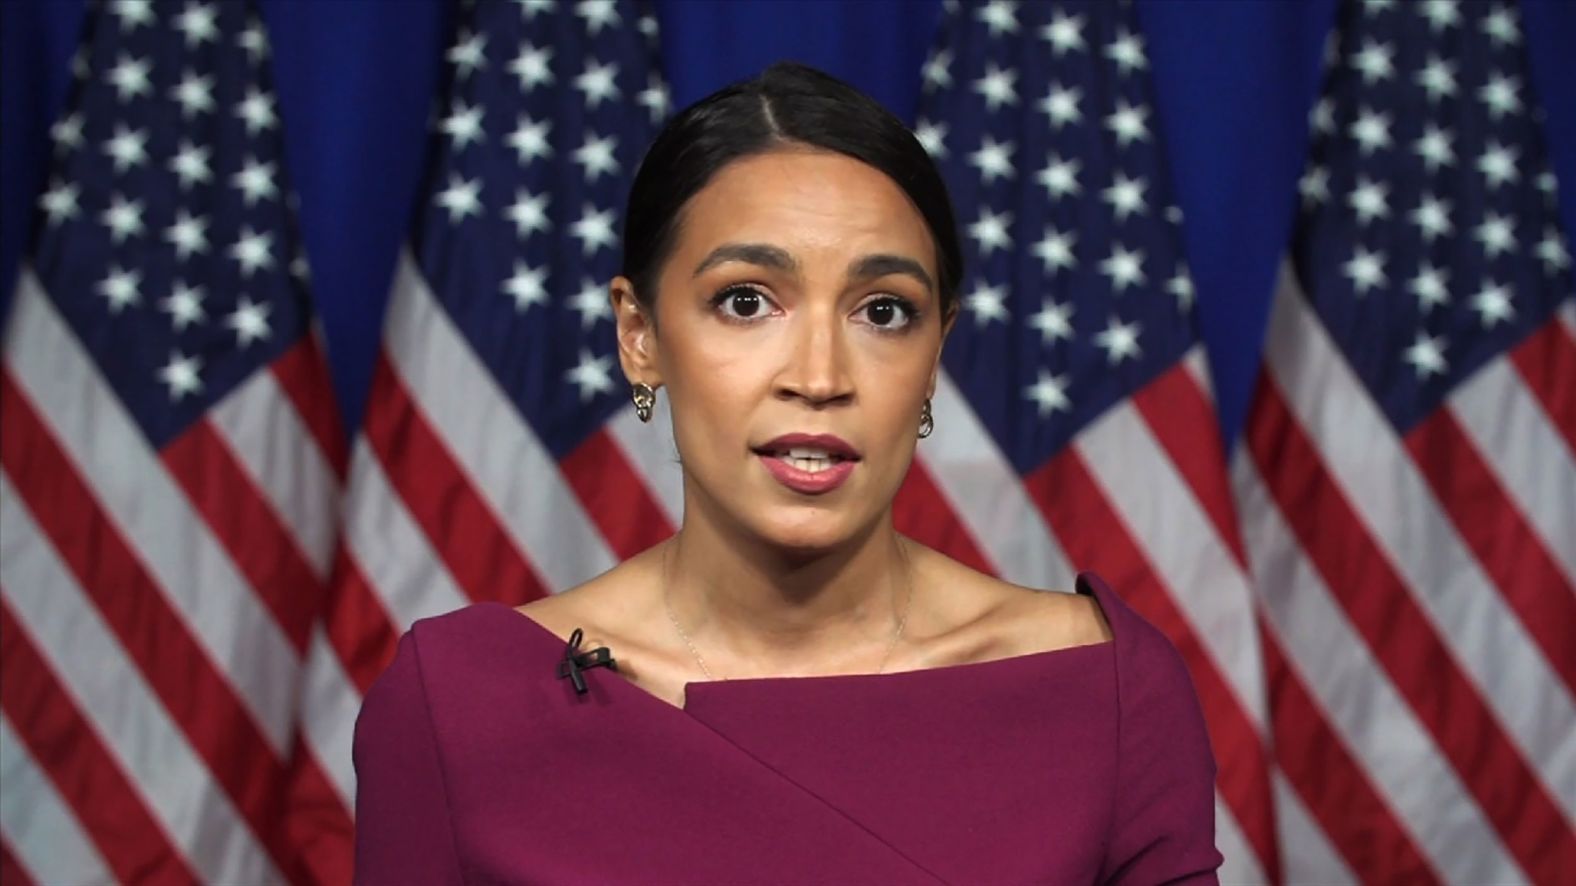 On Tuesday, US Rep. Alexandria Ocasio-Cortez <a href="index.php?page=&url=https%3A%2F%2Fwww.cnn.com%2Fpolitics%2Flive-news%2Fdnc-2020-day-2%2Fh_20947c42fdd6888f06fdd7118dfcfb60" target="_blank">seconded a nomination for US Sen. Bernie Sanders,</a> who finished runner-up to Biden in the Democratic race. In her brief remarks, she offered a poetic accounting of the progressive movement's aspirations — and offered her "fidelity and gratitude" to those in the fight alongside her.